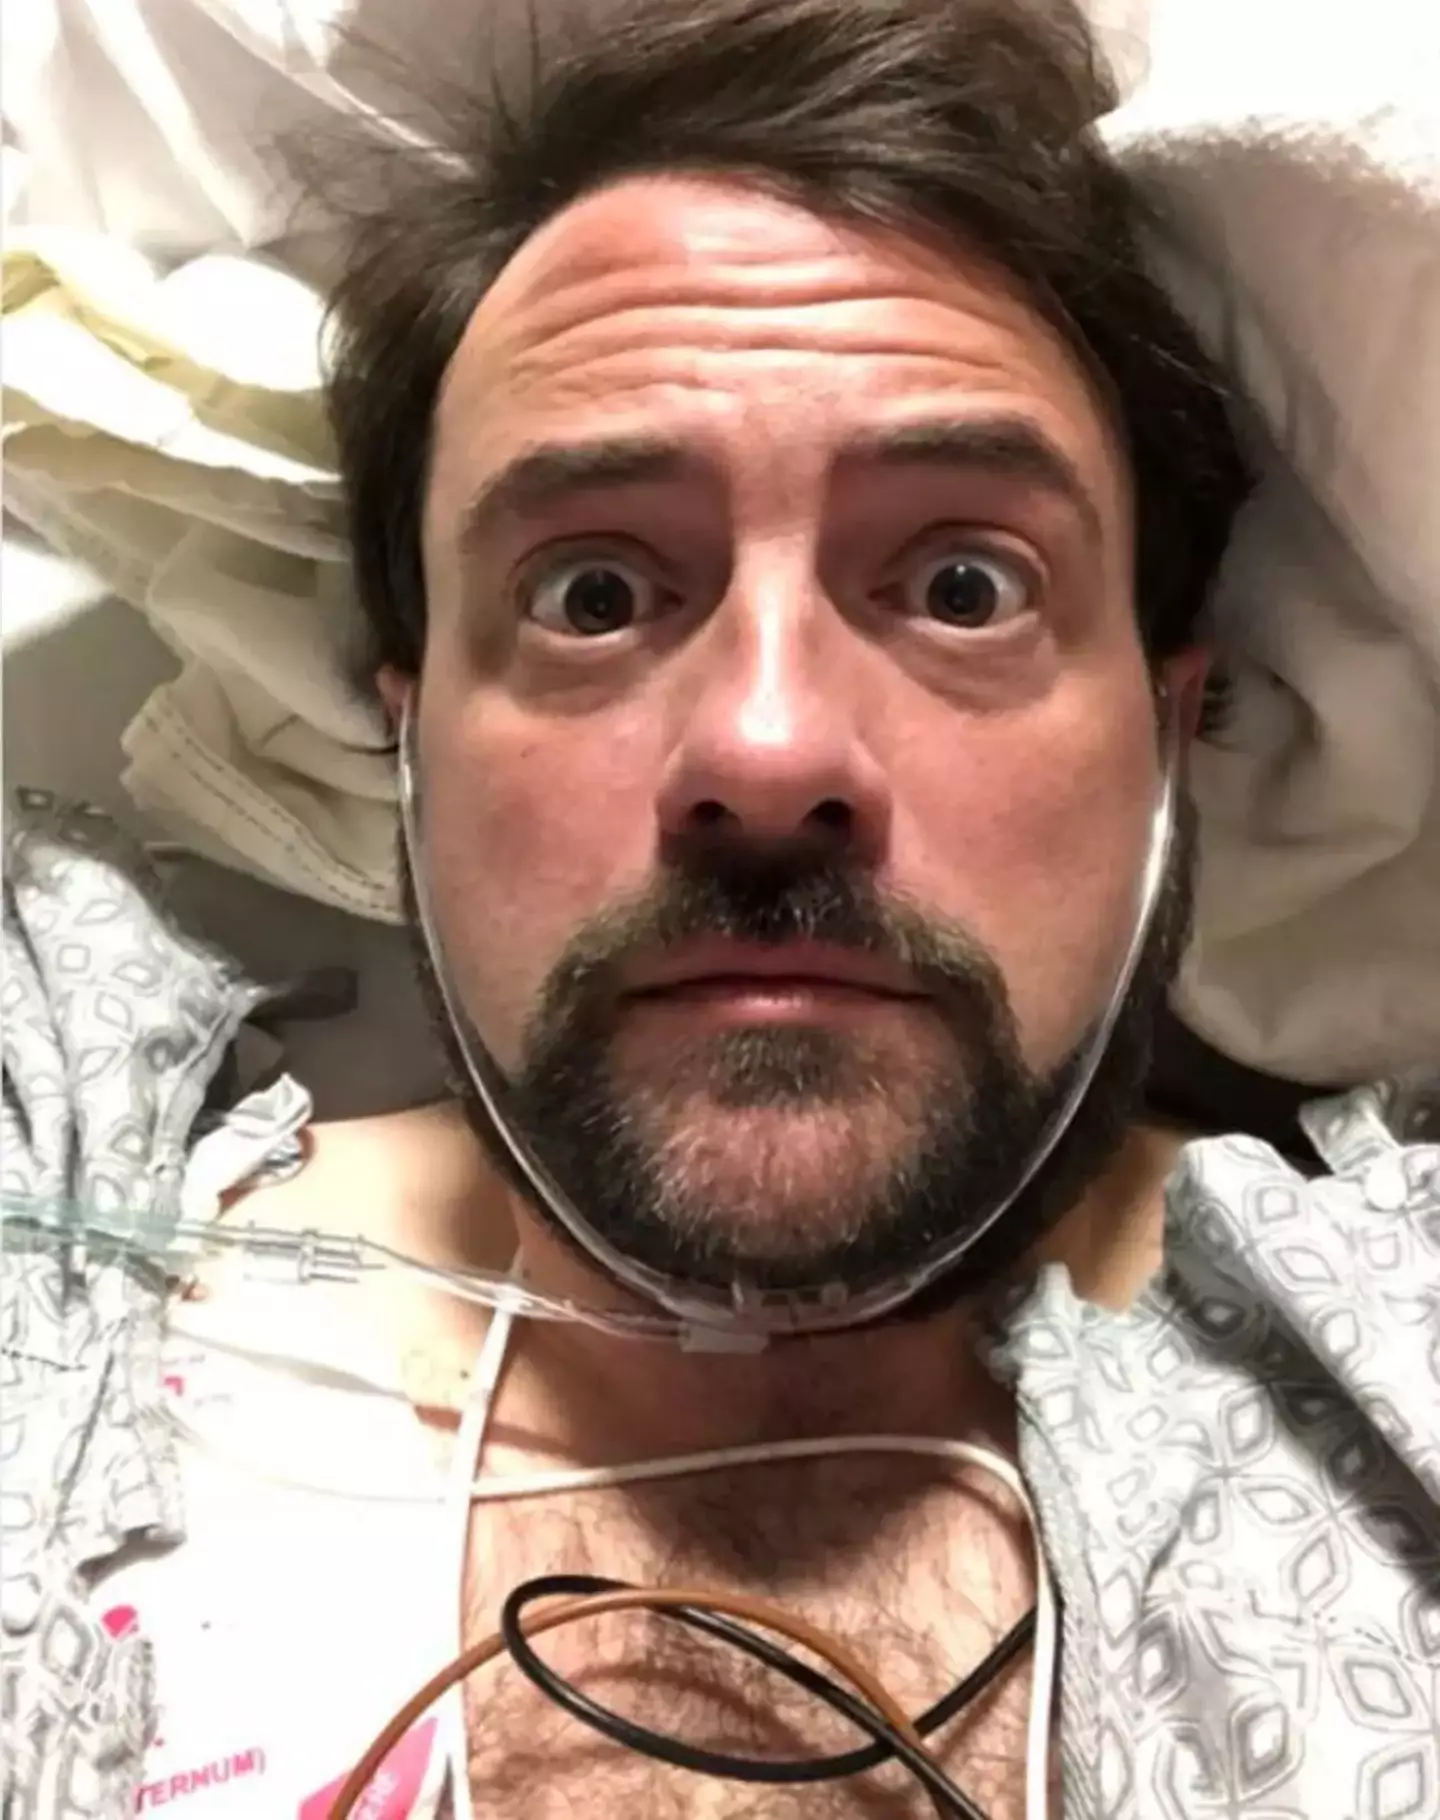 Filmmaker Kevin Smith suffered a heart attack in 2018.